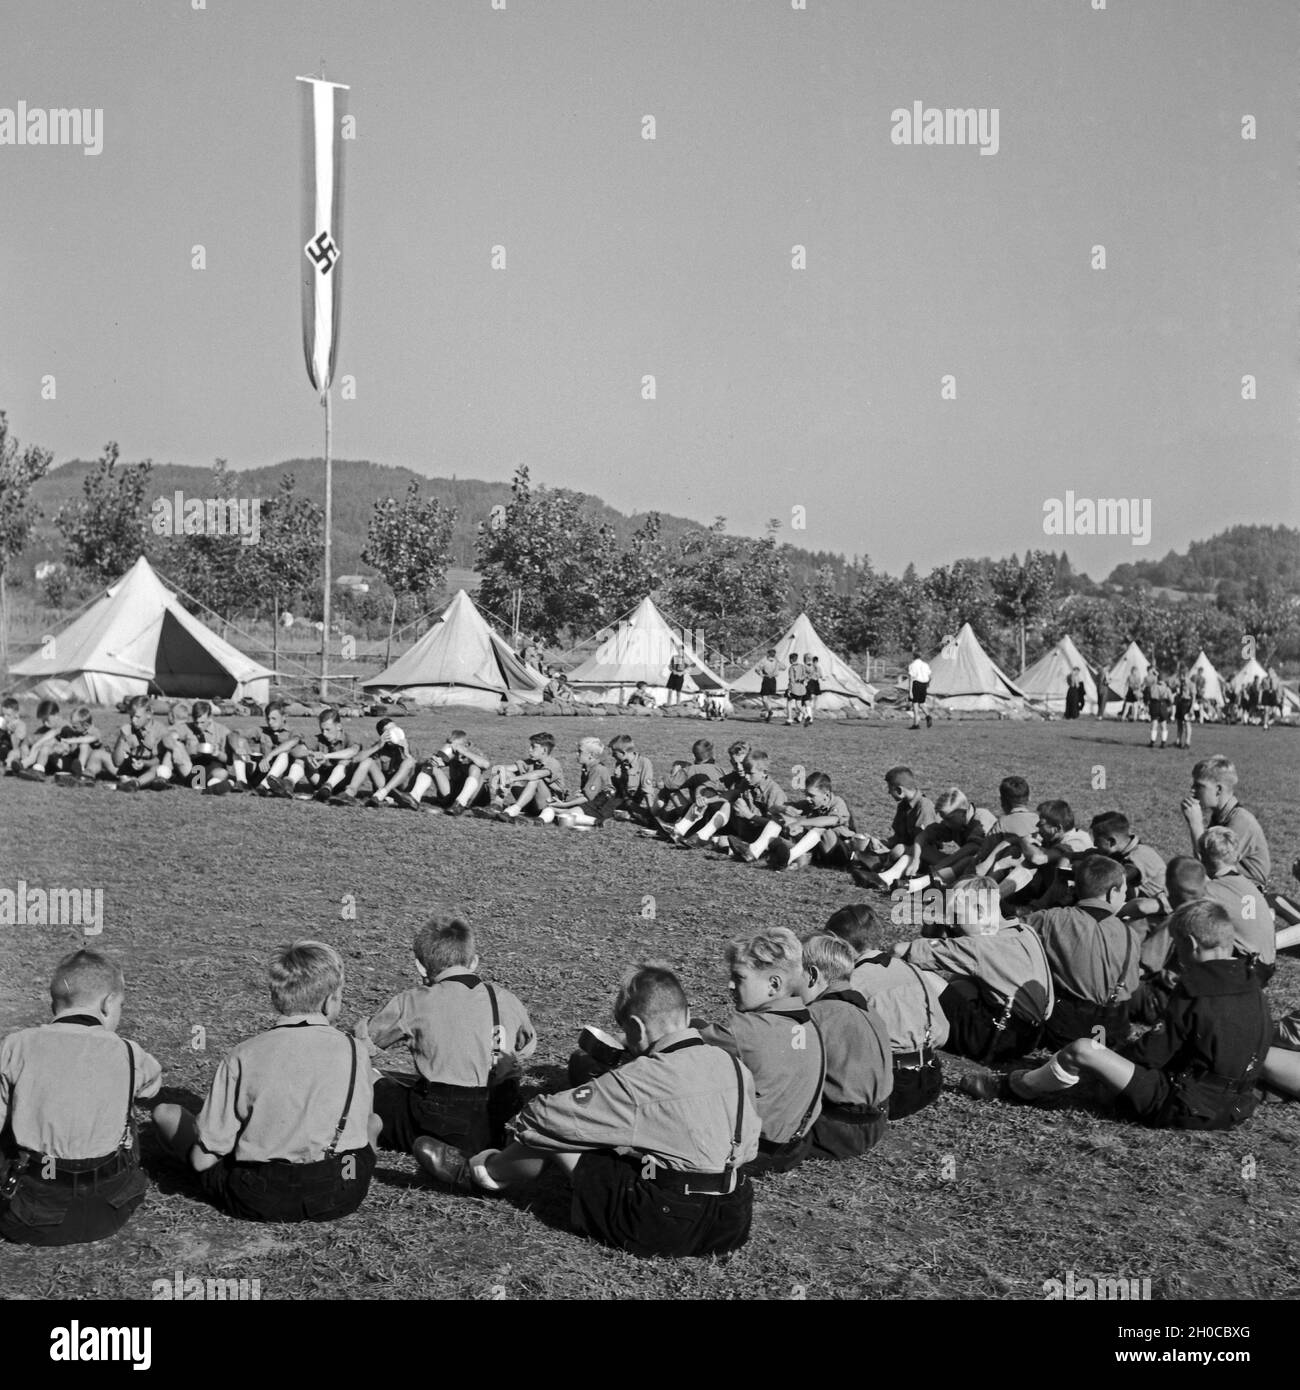 Sitzkreis zur Empfang des Tagesbefehls im Hitlerjugend Lager, Österreich 1930er Jahre. Sitting and waiting for the order of the day at Hitler youth camp, Austria 1930s. Stock Photo